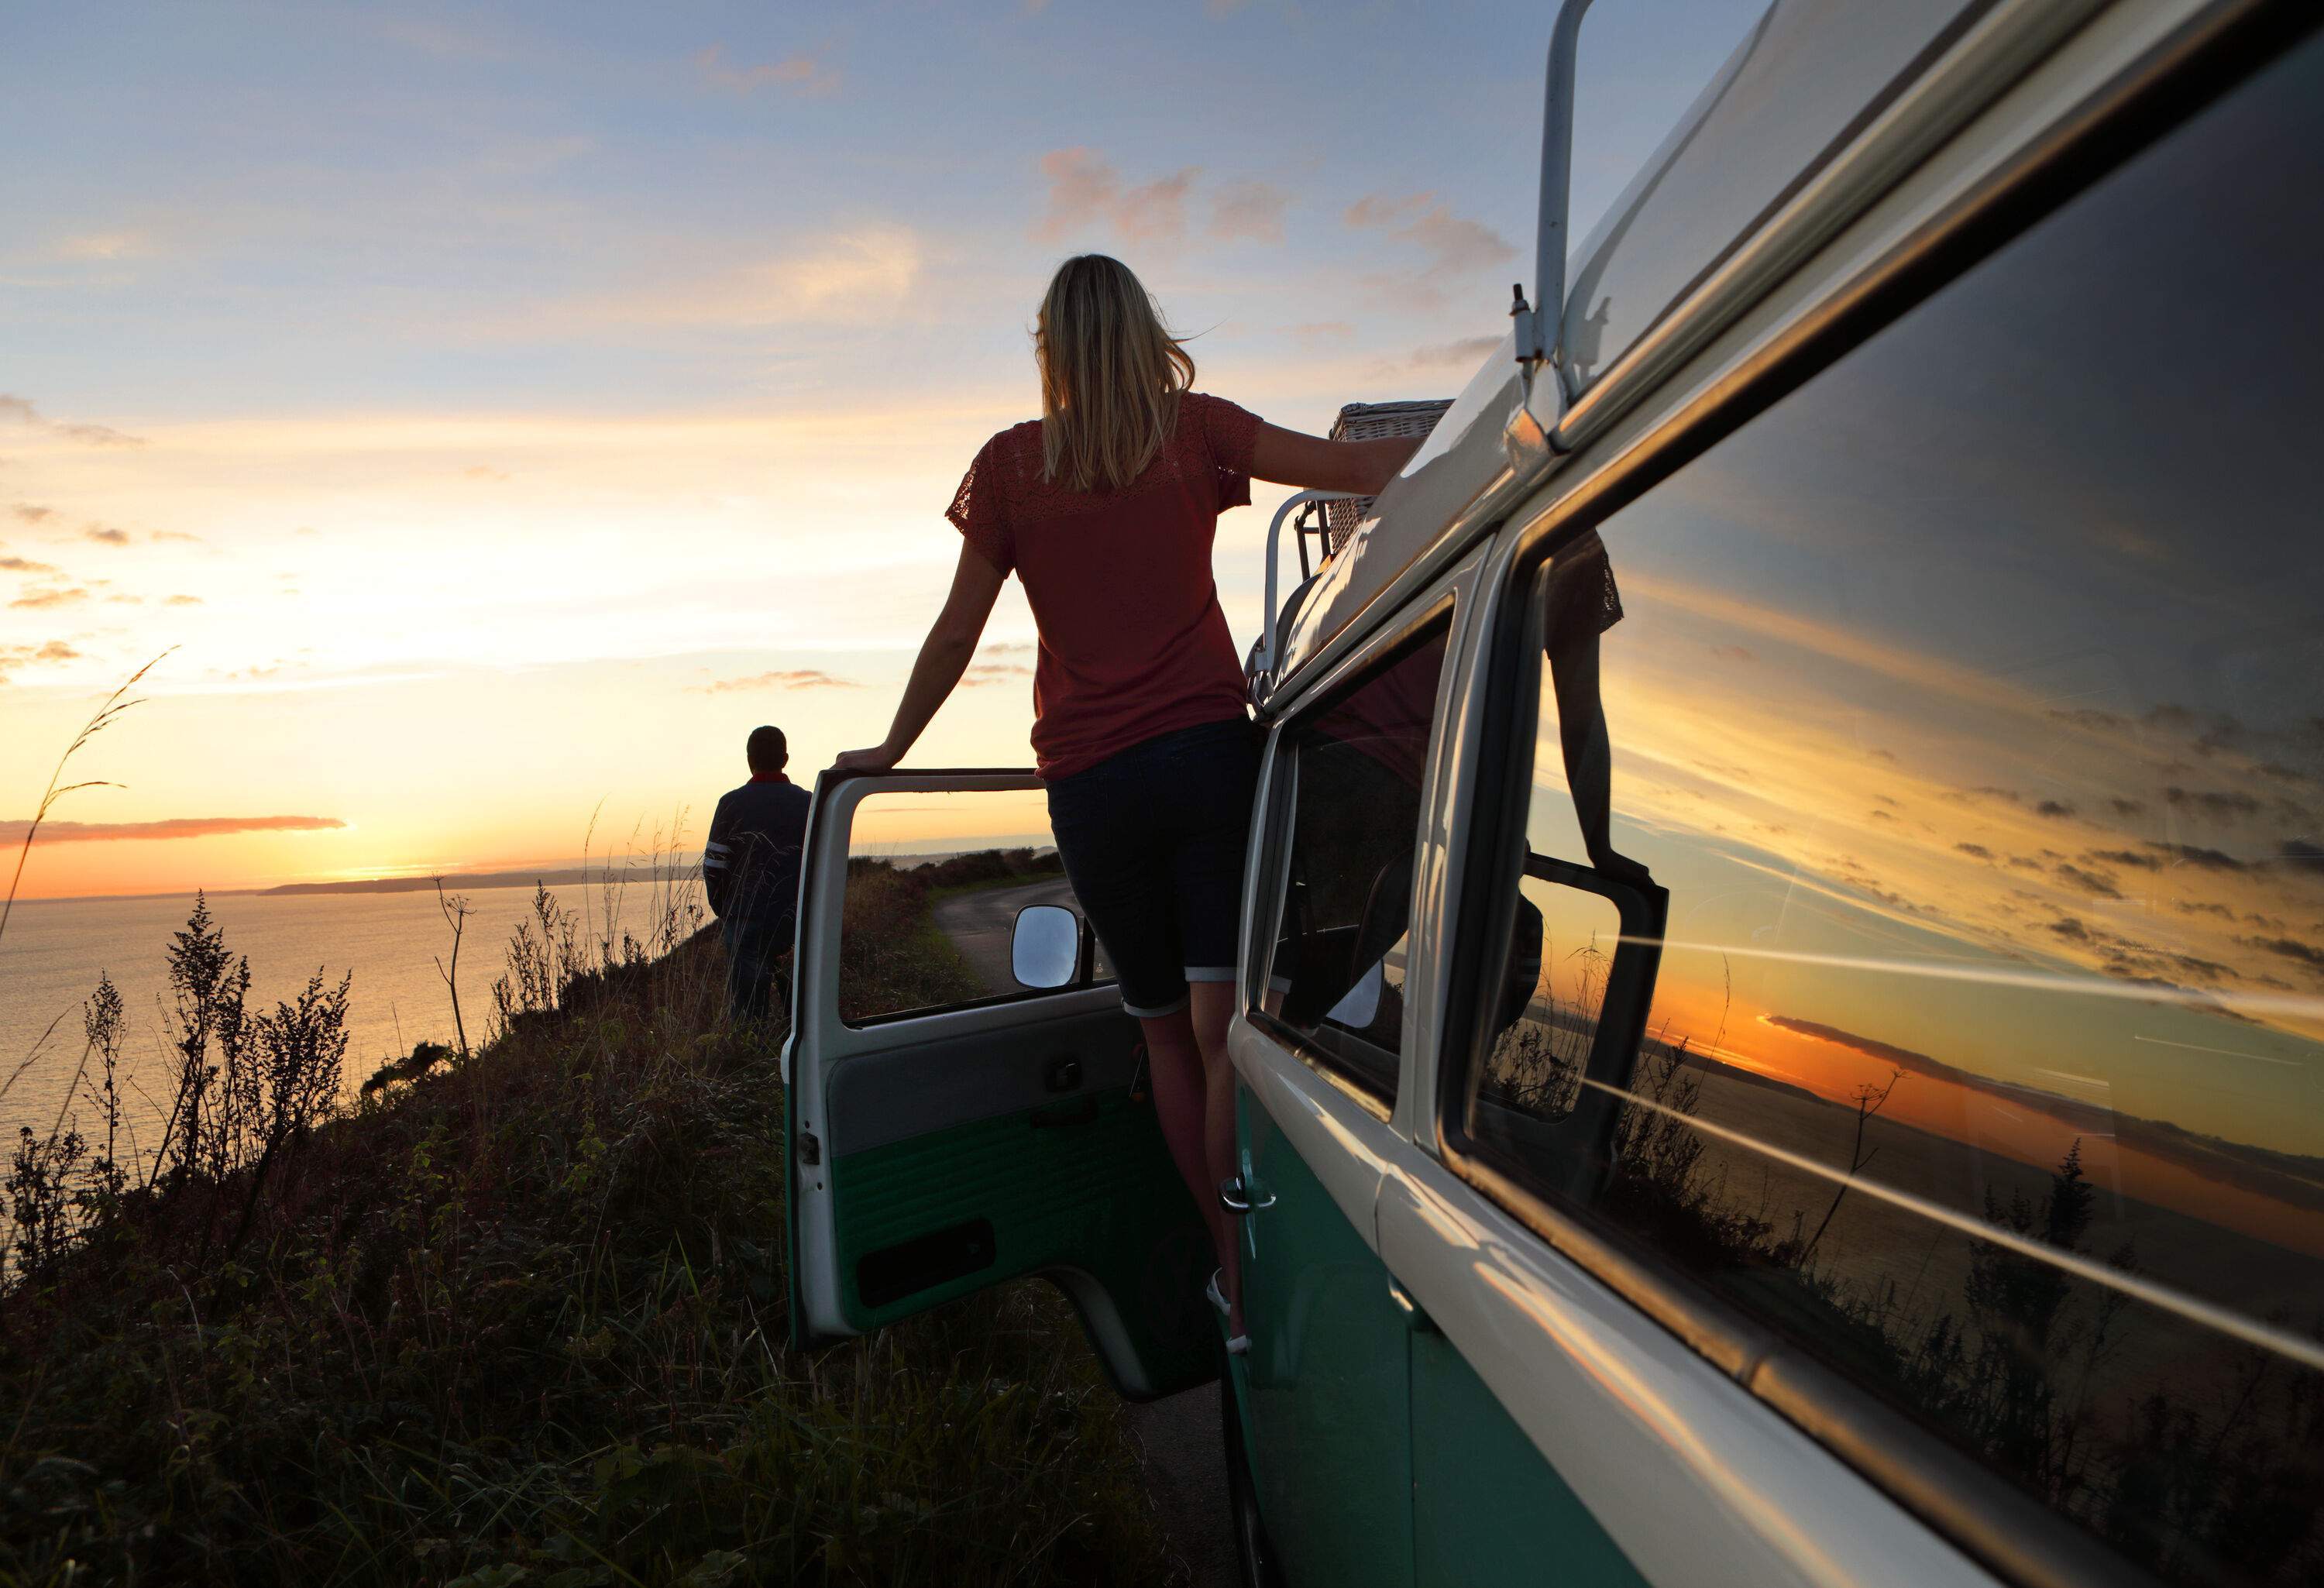 Silhouette of two people gazing at the sunset, one stands on the hillside and the other standing in the car with its door open.